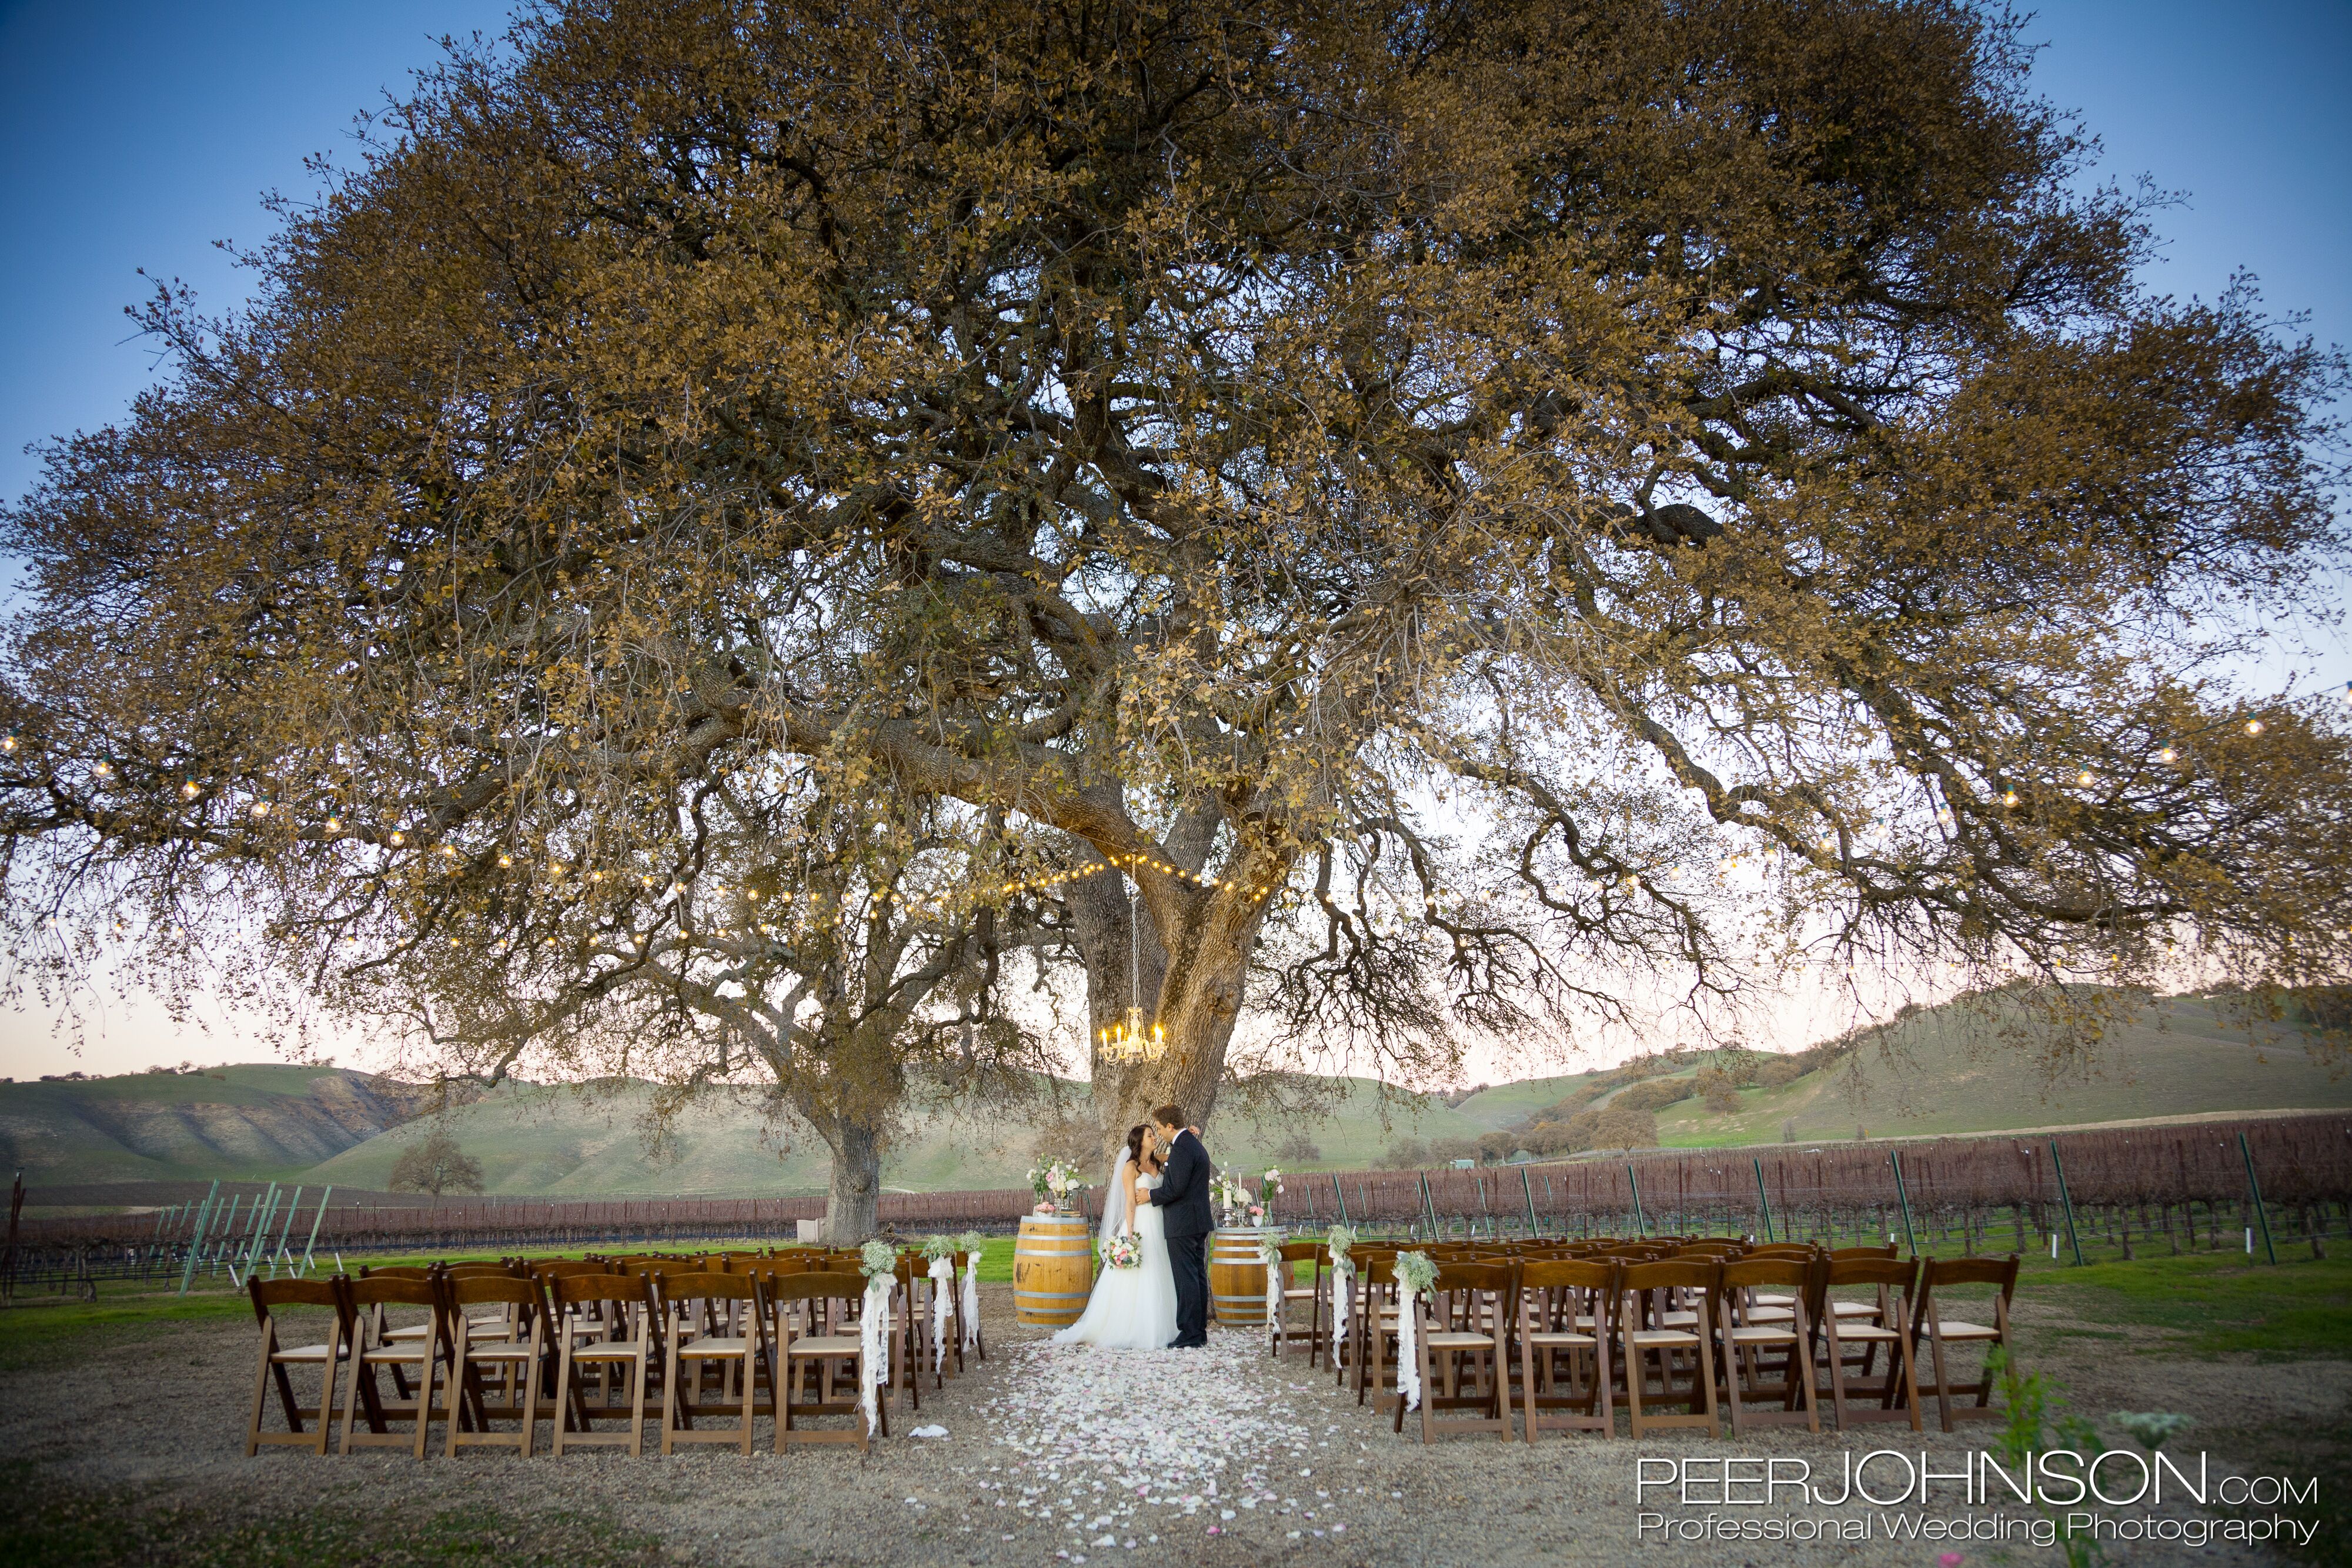 Cass Winery and Vineyard | Reception Venues - Paso Robles, CA